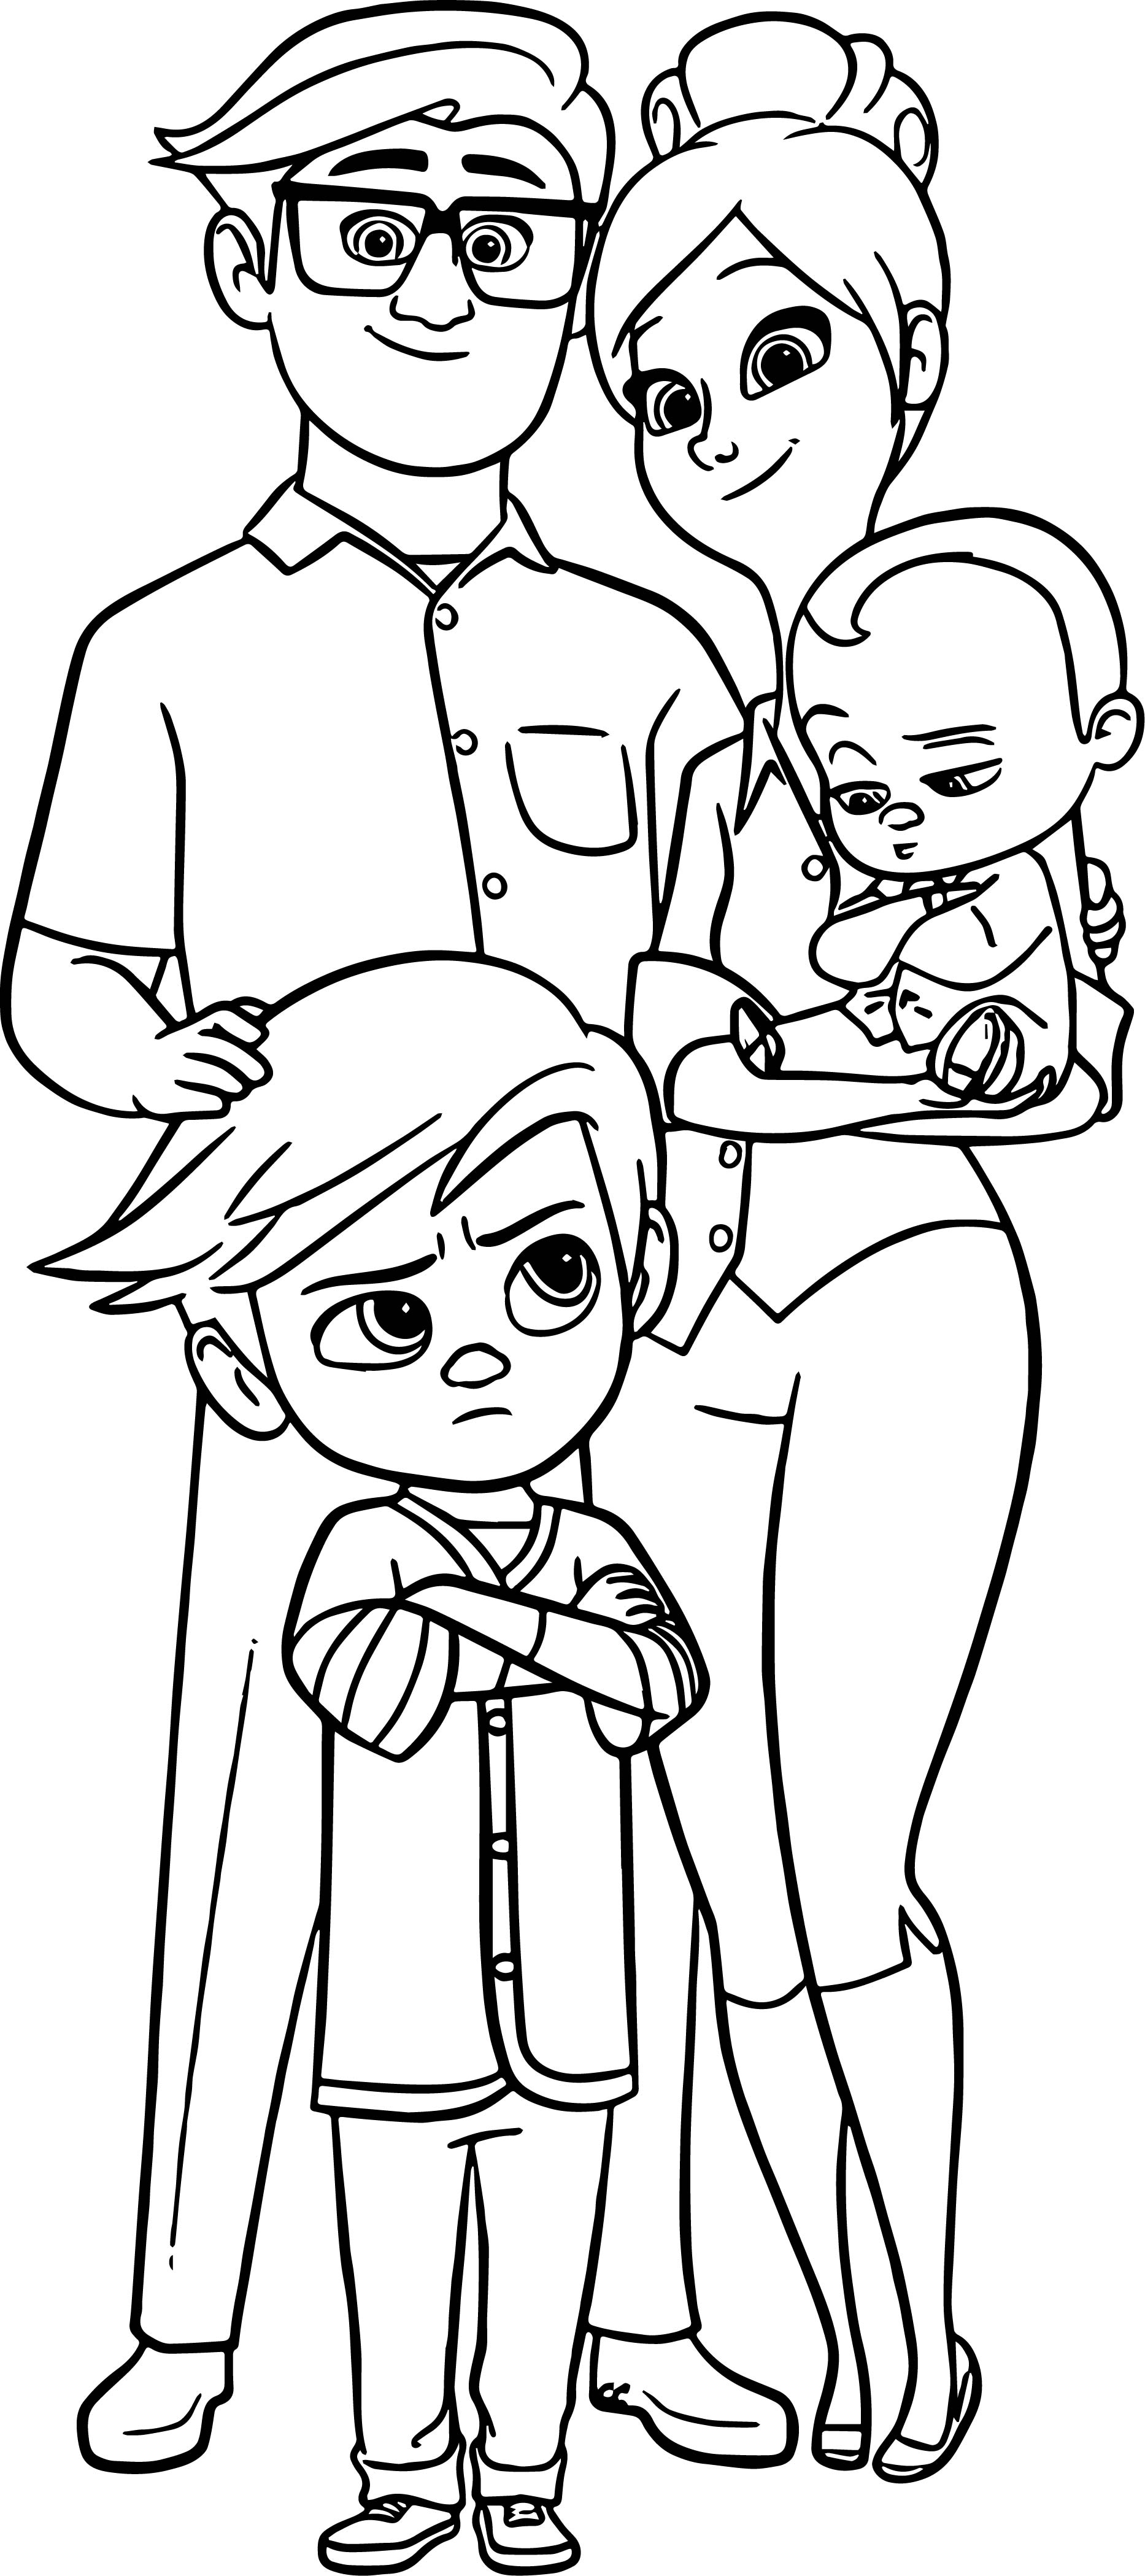 cartoon-family-coloring-pages-at-getcolorings-free-printable-colorings-pages-to-print-and